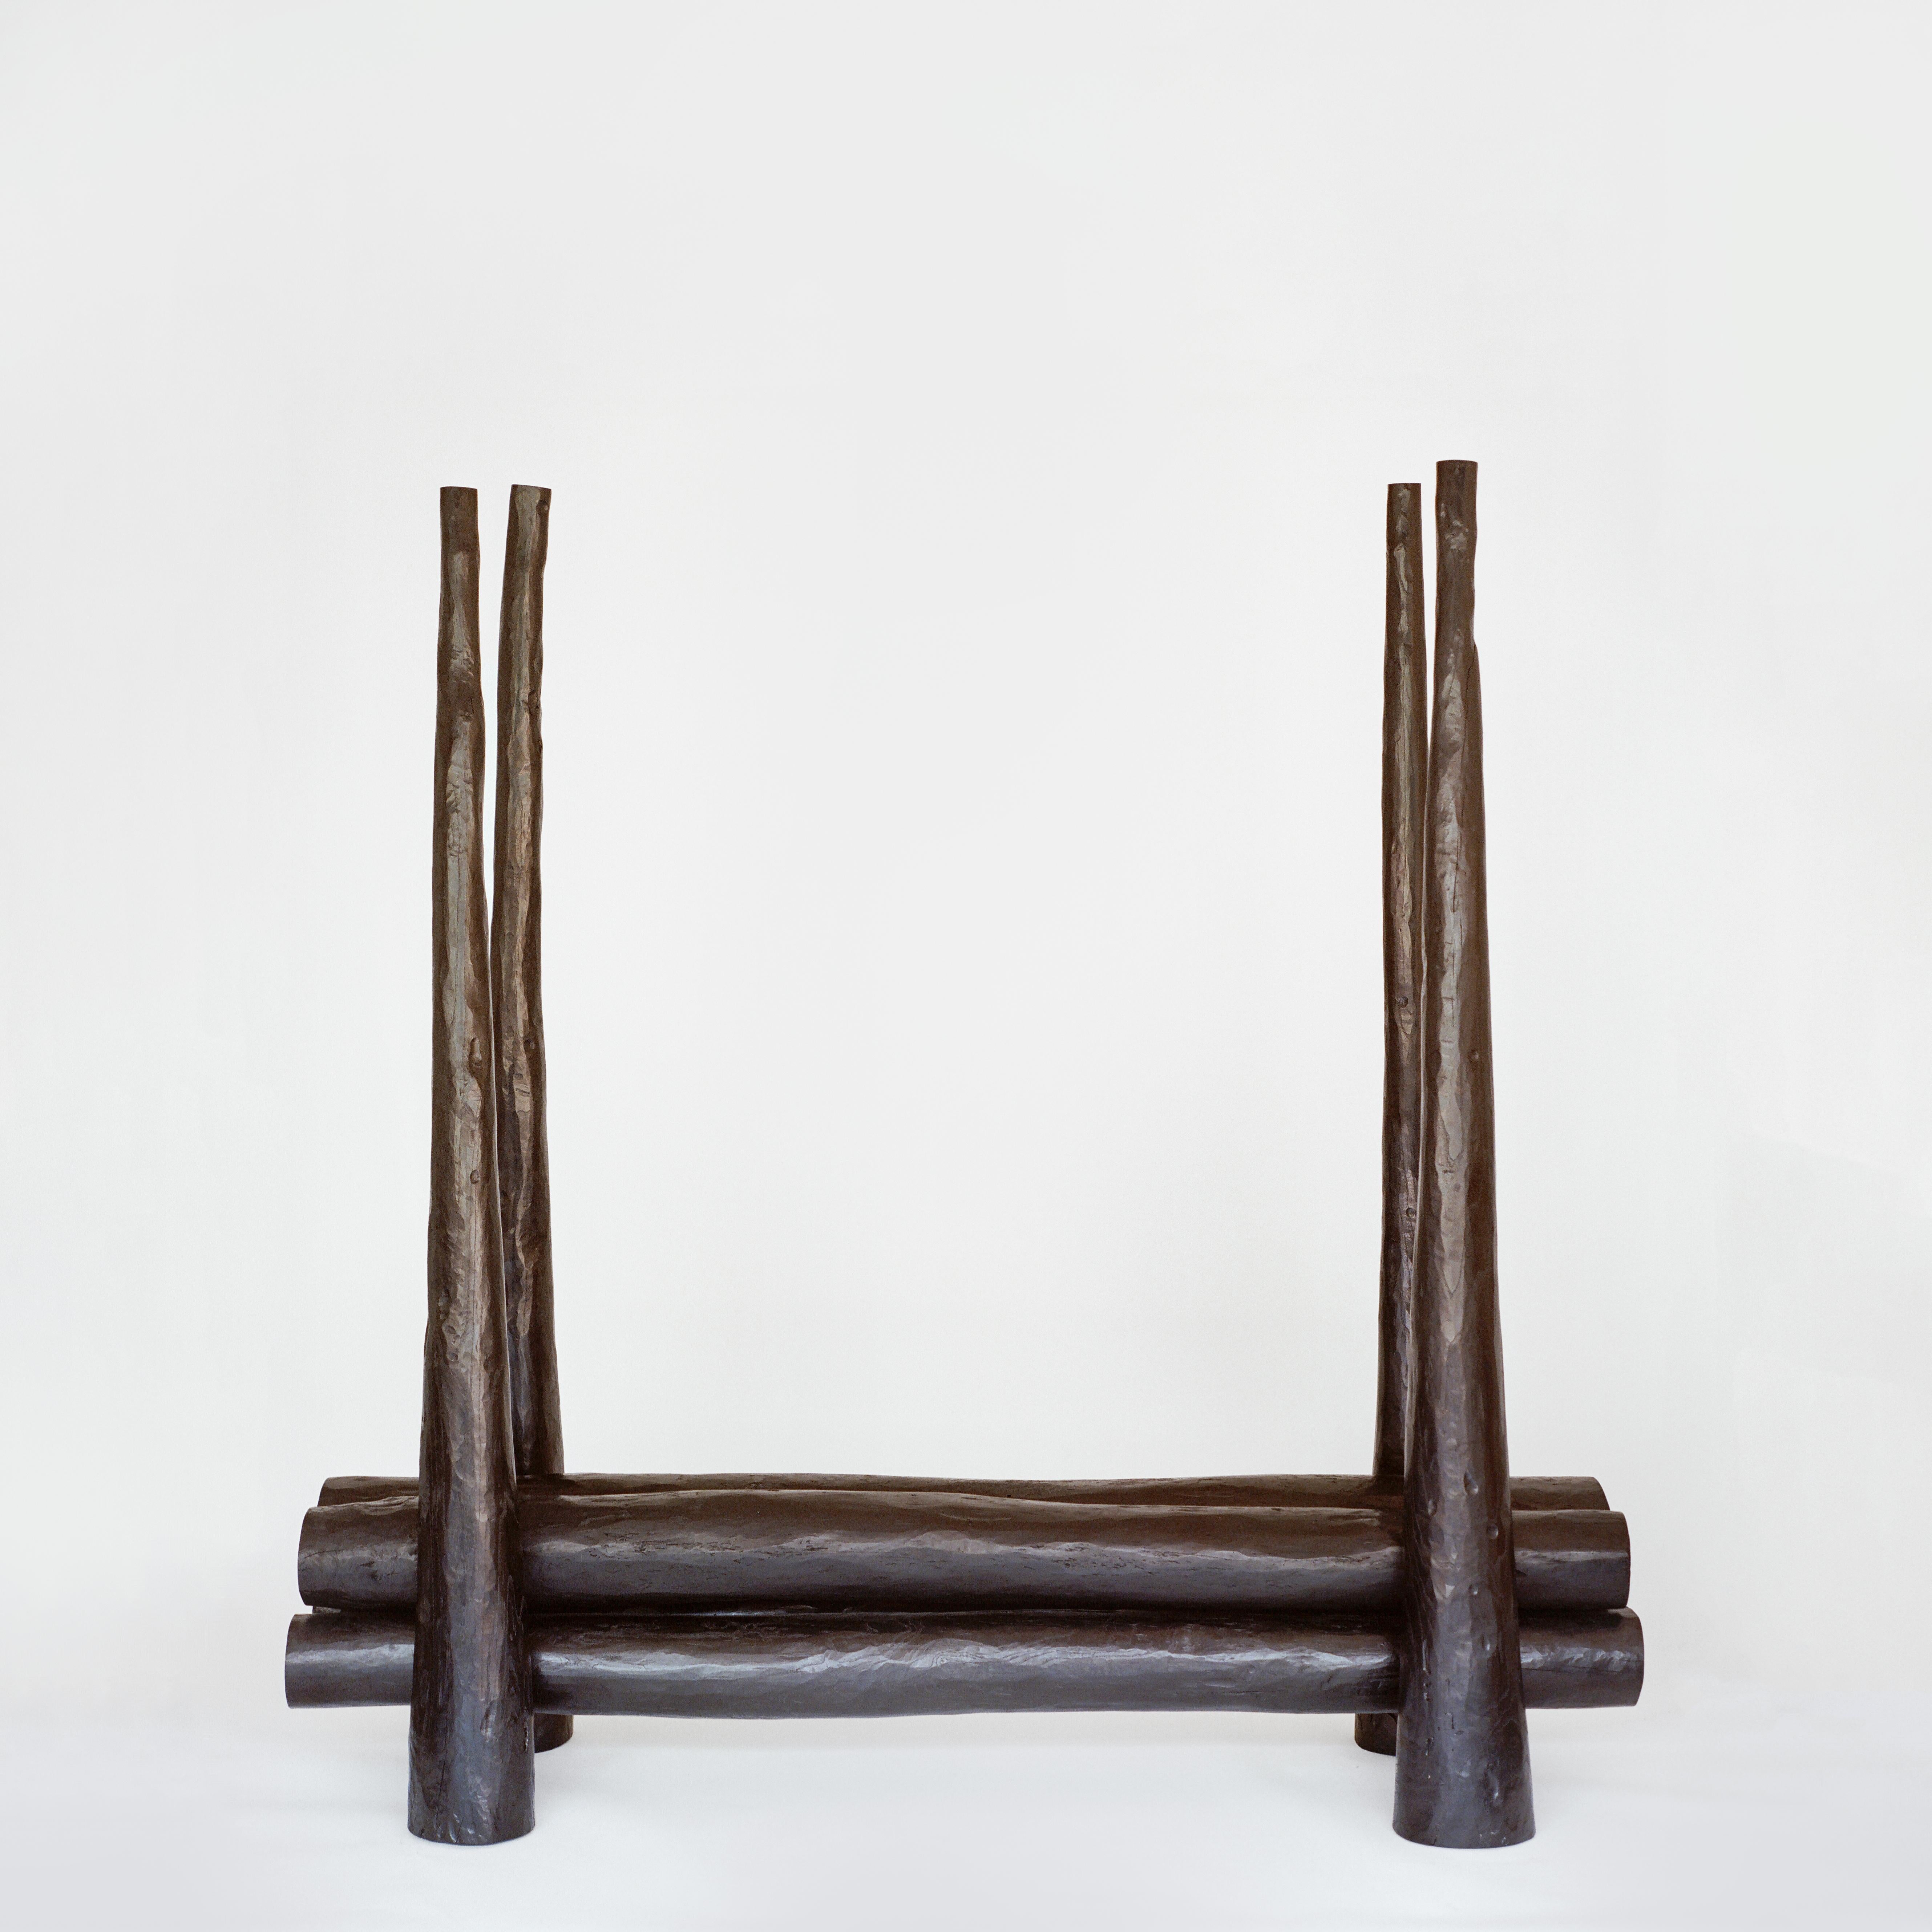 Untitled Bench by Henry D'ath
Dimensions: D 200 x W 60 x H 195 cm
Materials: Wood.
Available finishes: Natural, Black Ink. 


Henry d’ath is a New Zealand-born, Hong Kong-based artist and architect. 
Using predominantly salvaged material, the artist